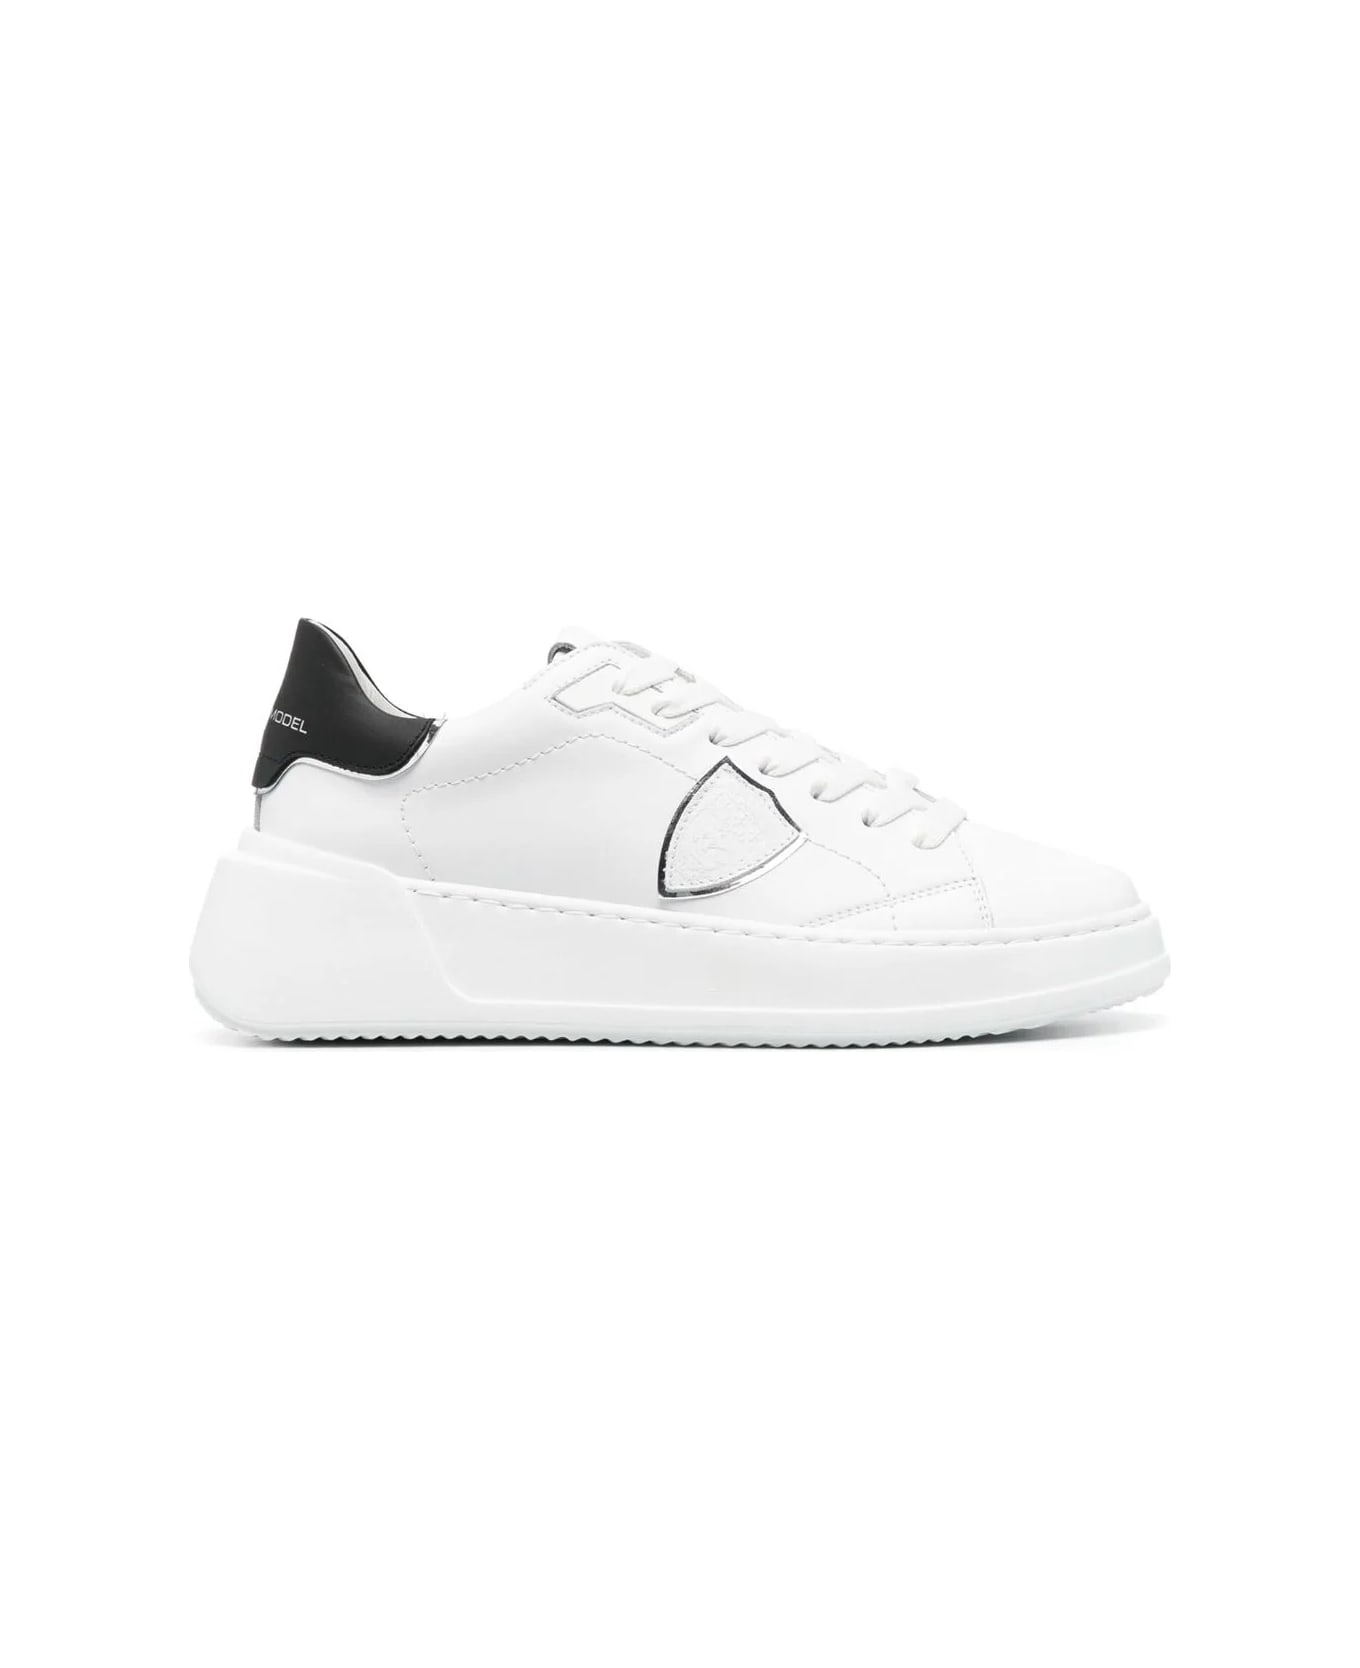 Philippe Model Tres Temple Sneakers - White And Black - White スニーカー